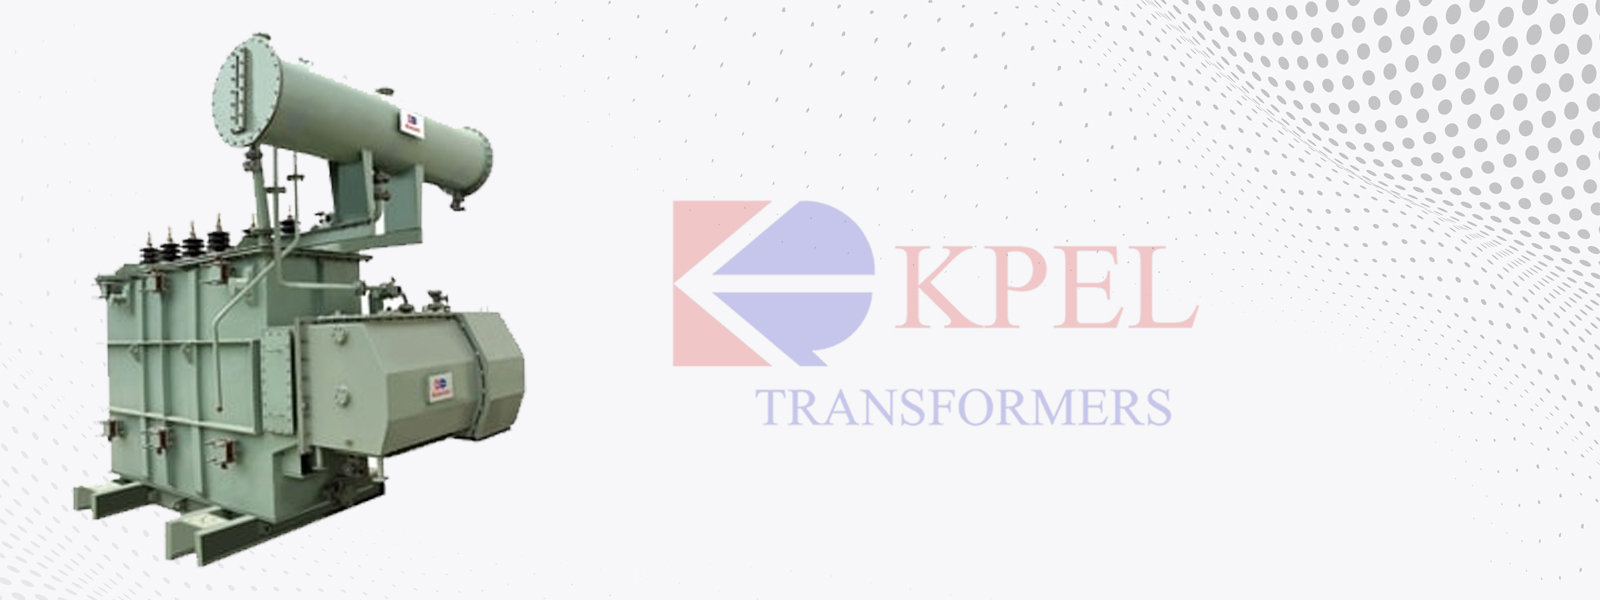 Oil Filled Transformers Manufacturers and Suppliers